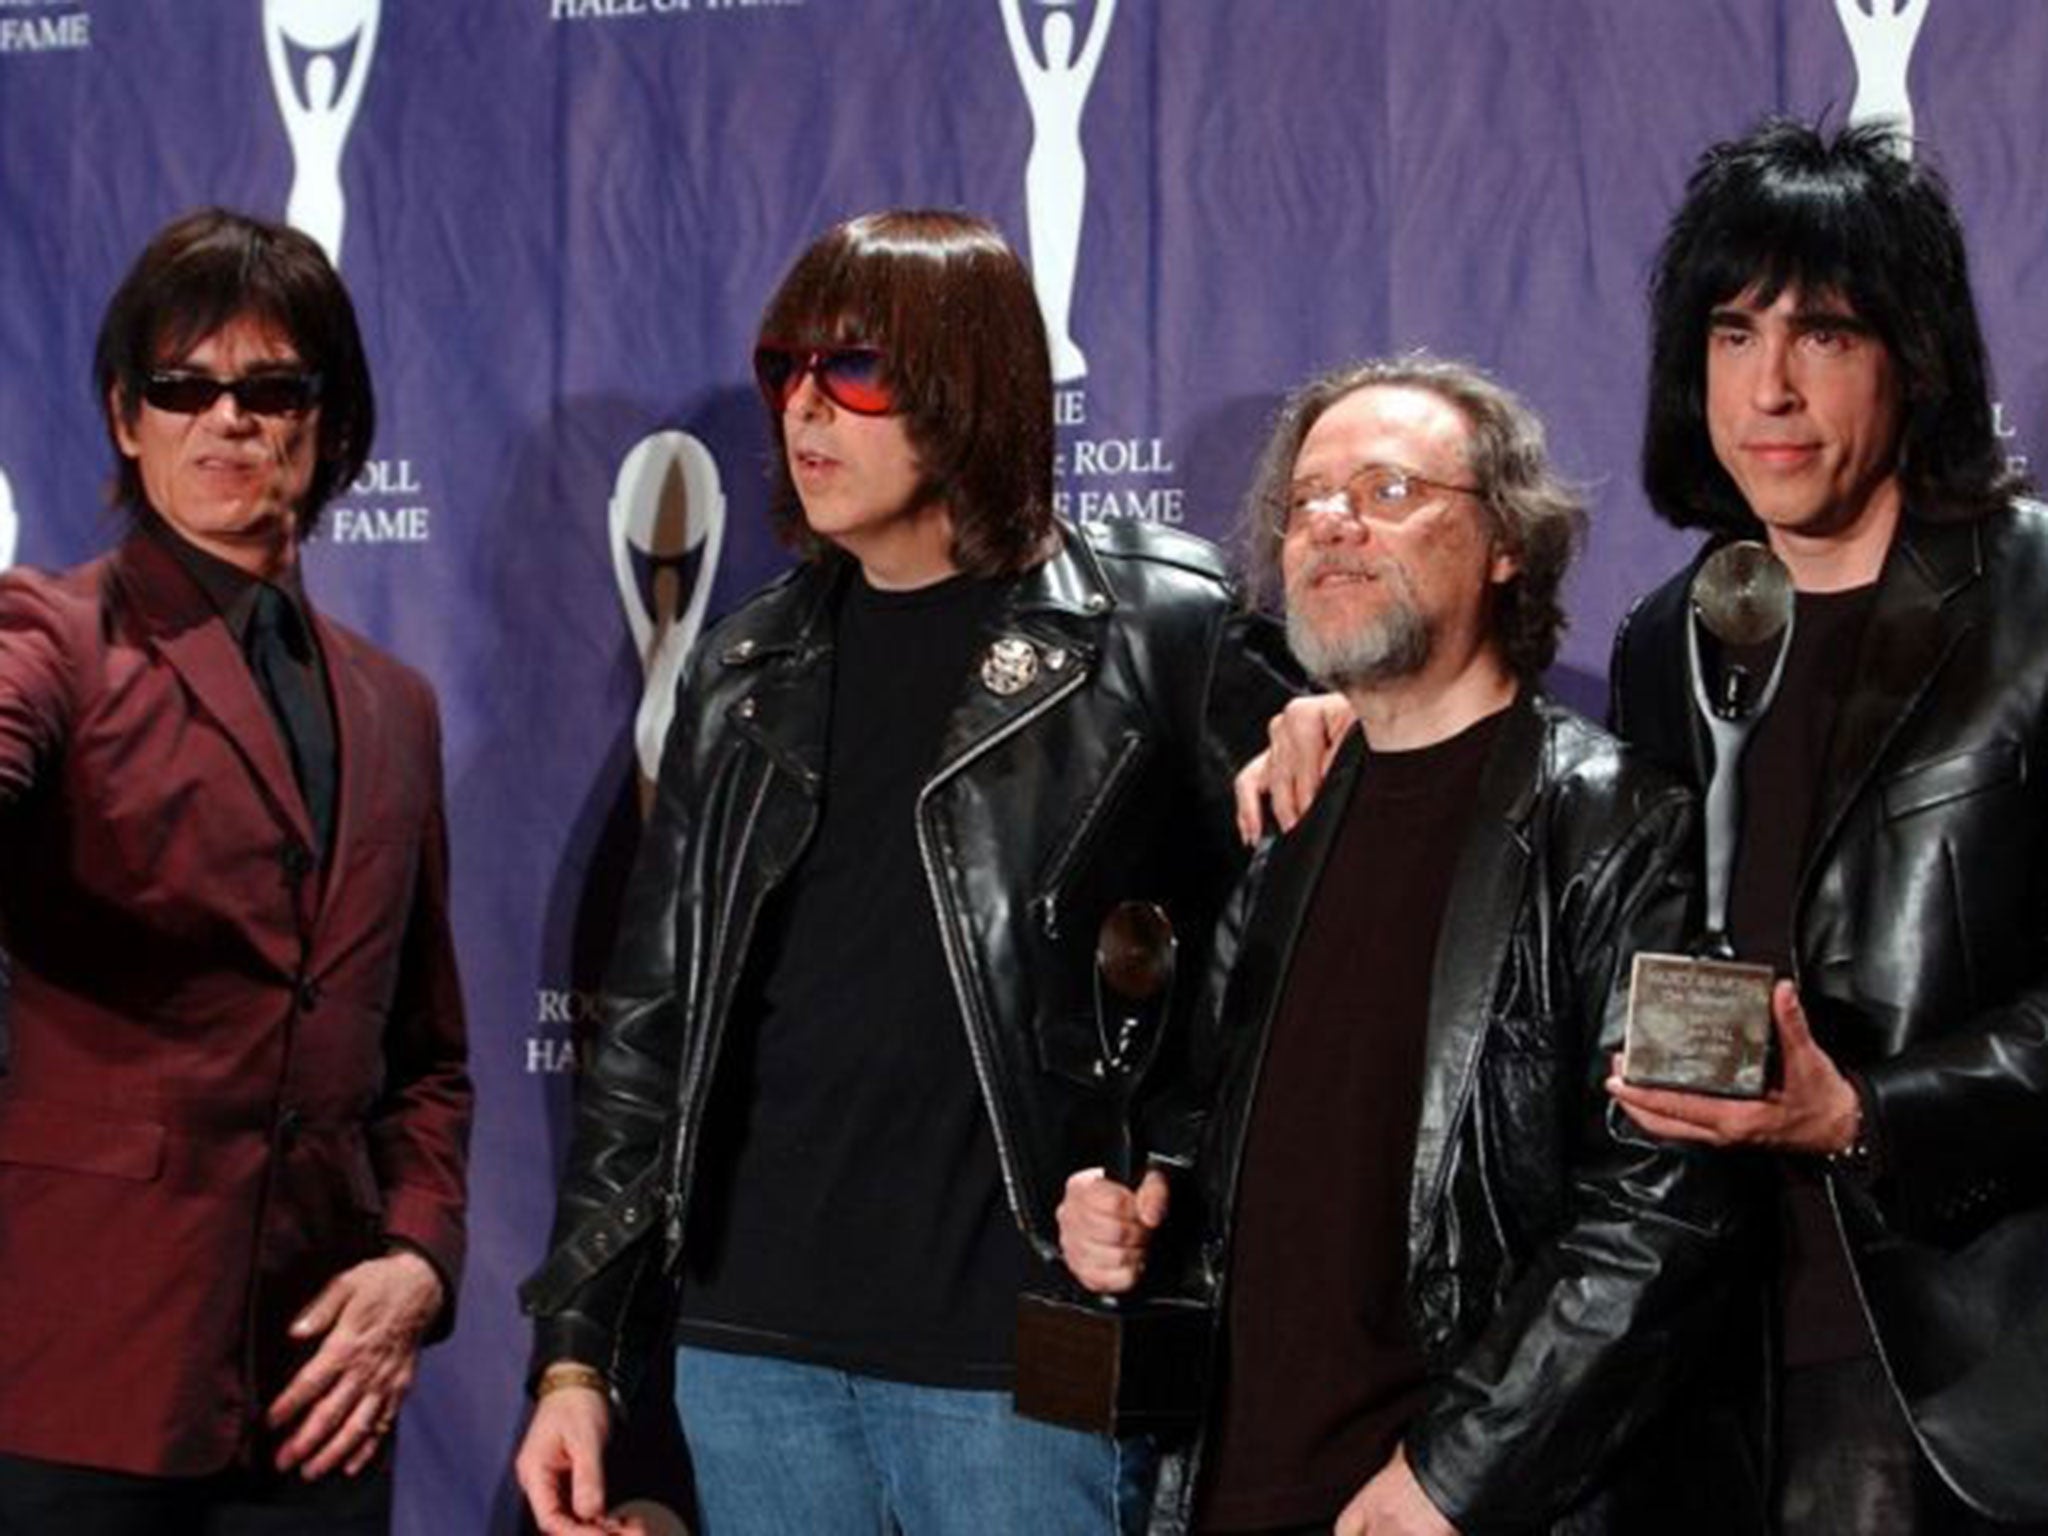 Tommy Ramone (second from right) getting inducted into the Rock and Roll Hall of Fame with the Ramones in 2002.